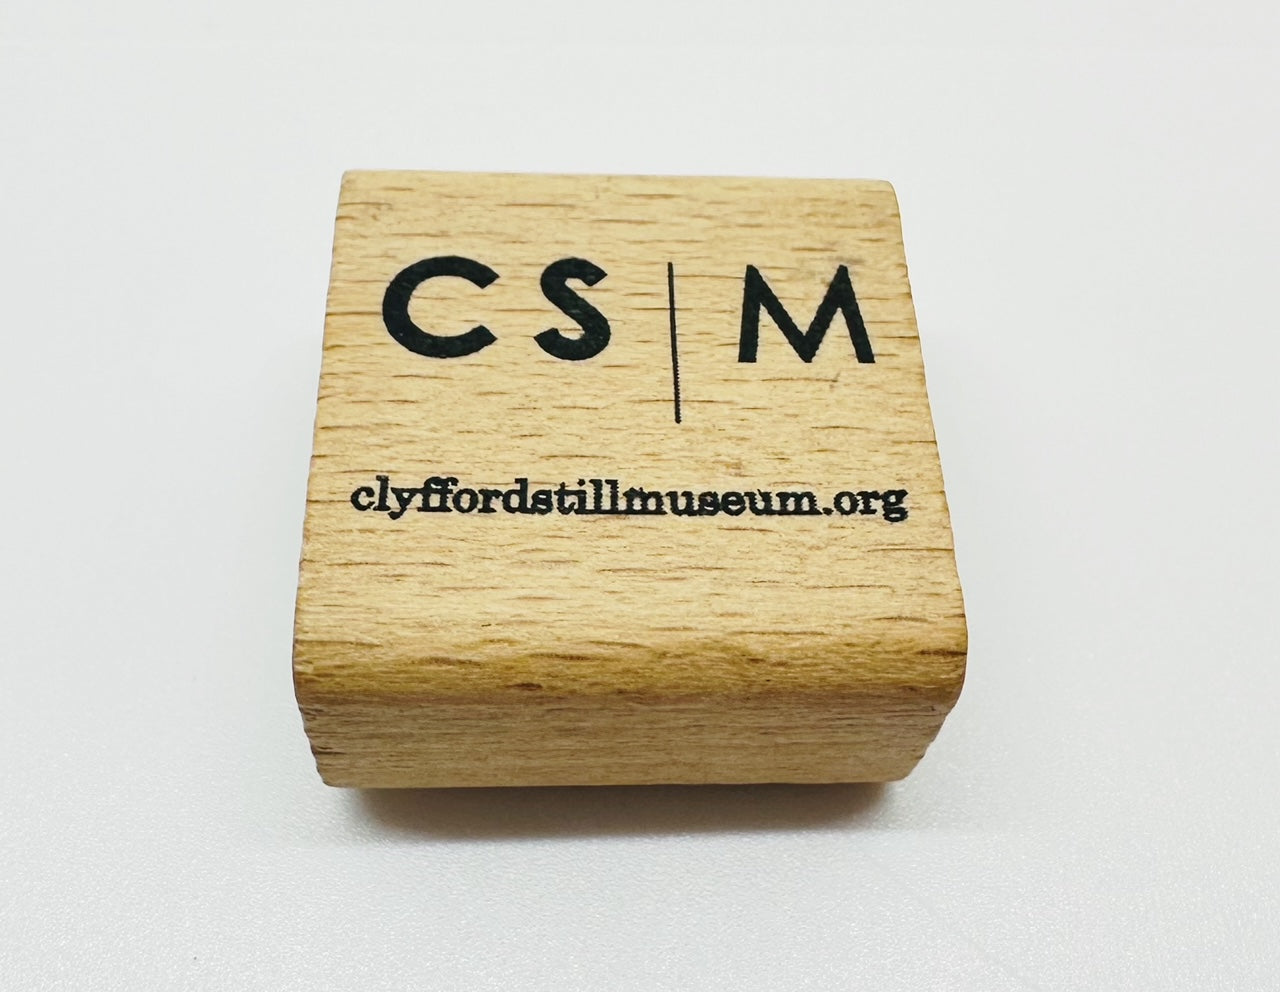 Top view of pencil sharpener with CSM logo